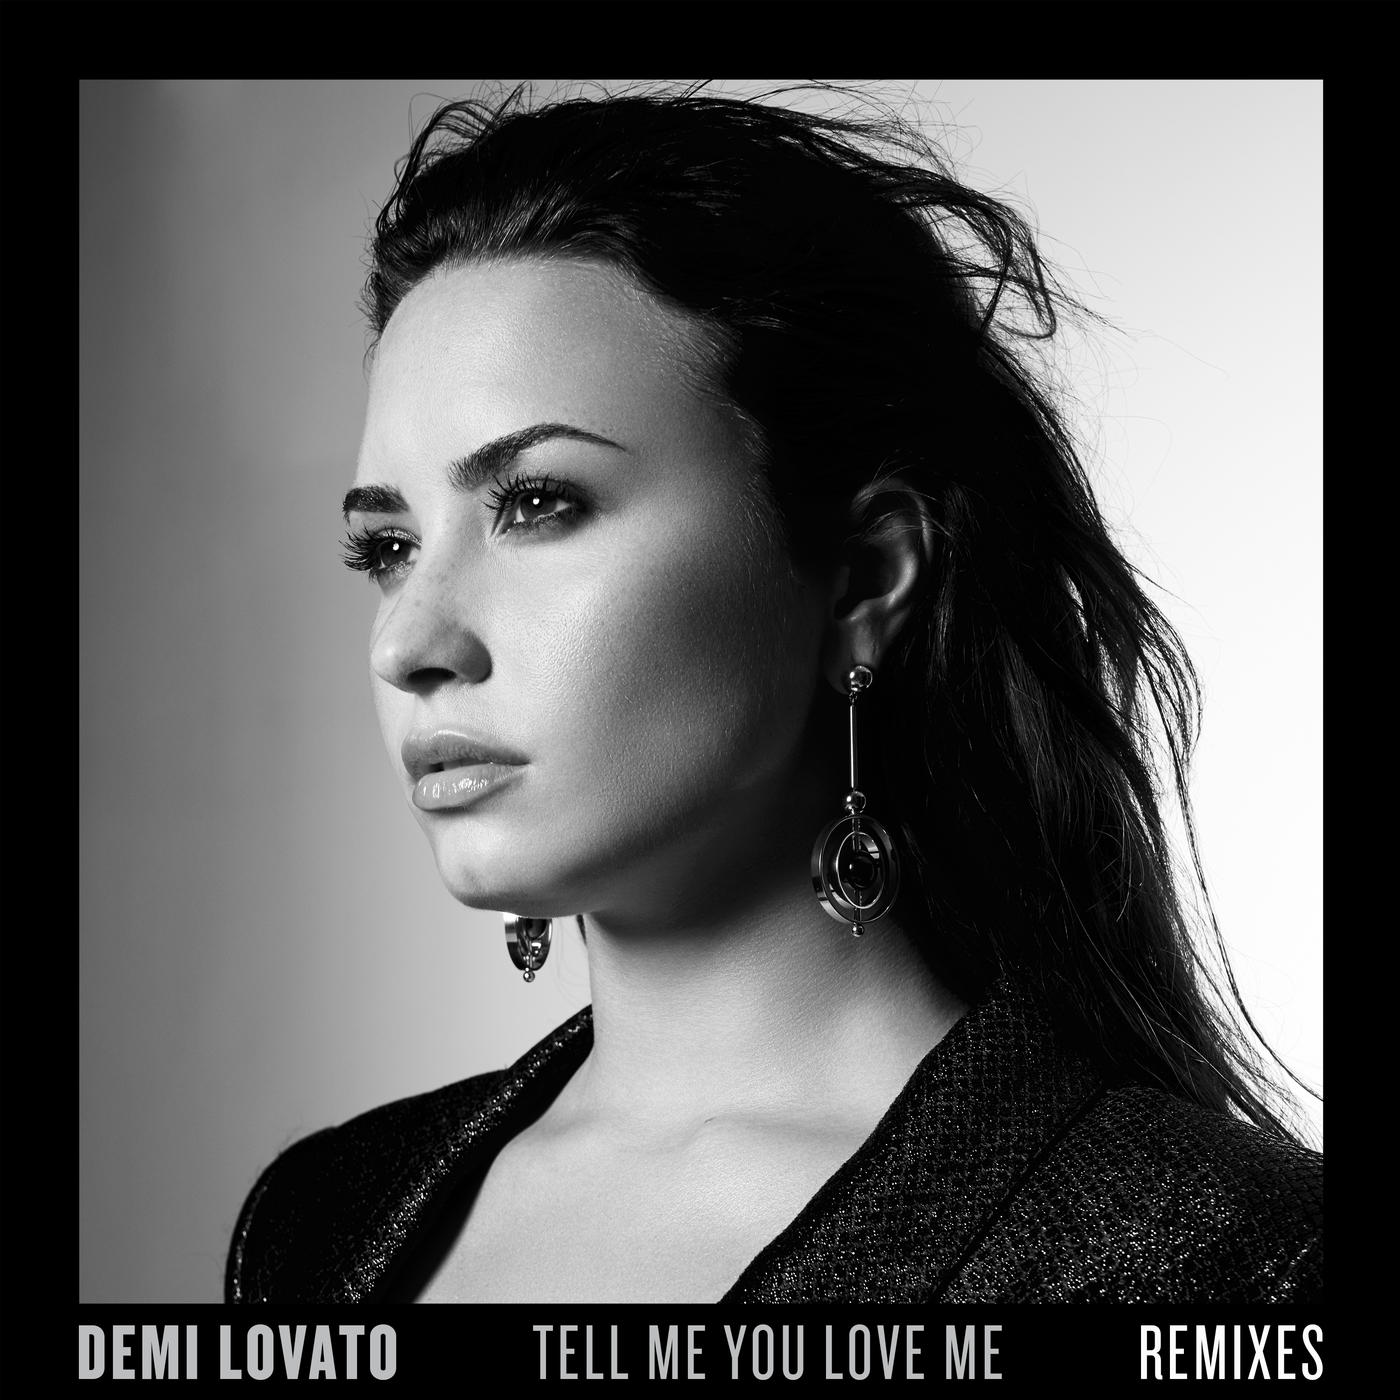 Tell Me You Love Me (song) | Demi Lovato Wiki | FANDOM powered by Wikia